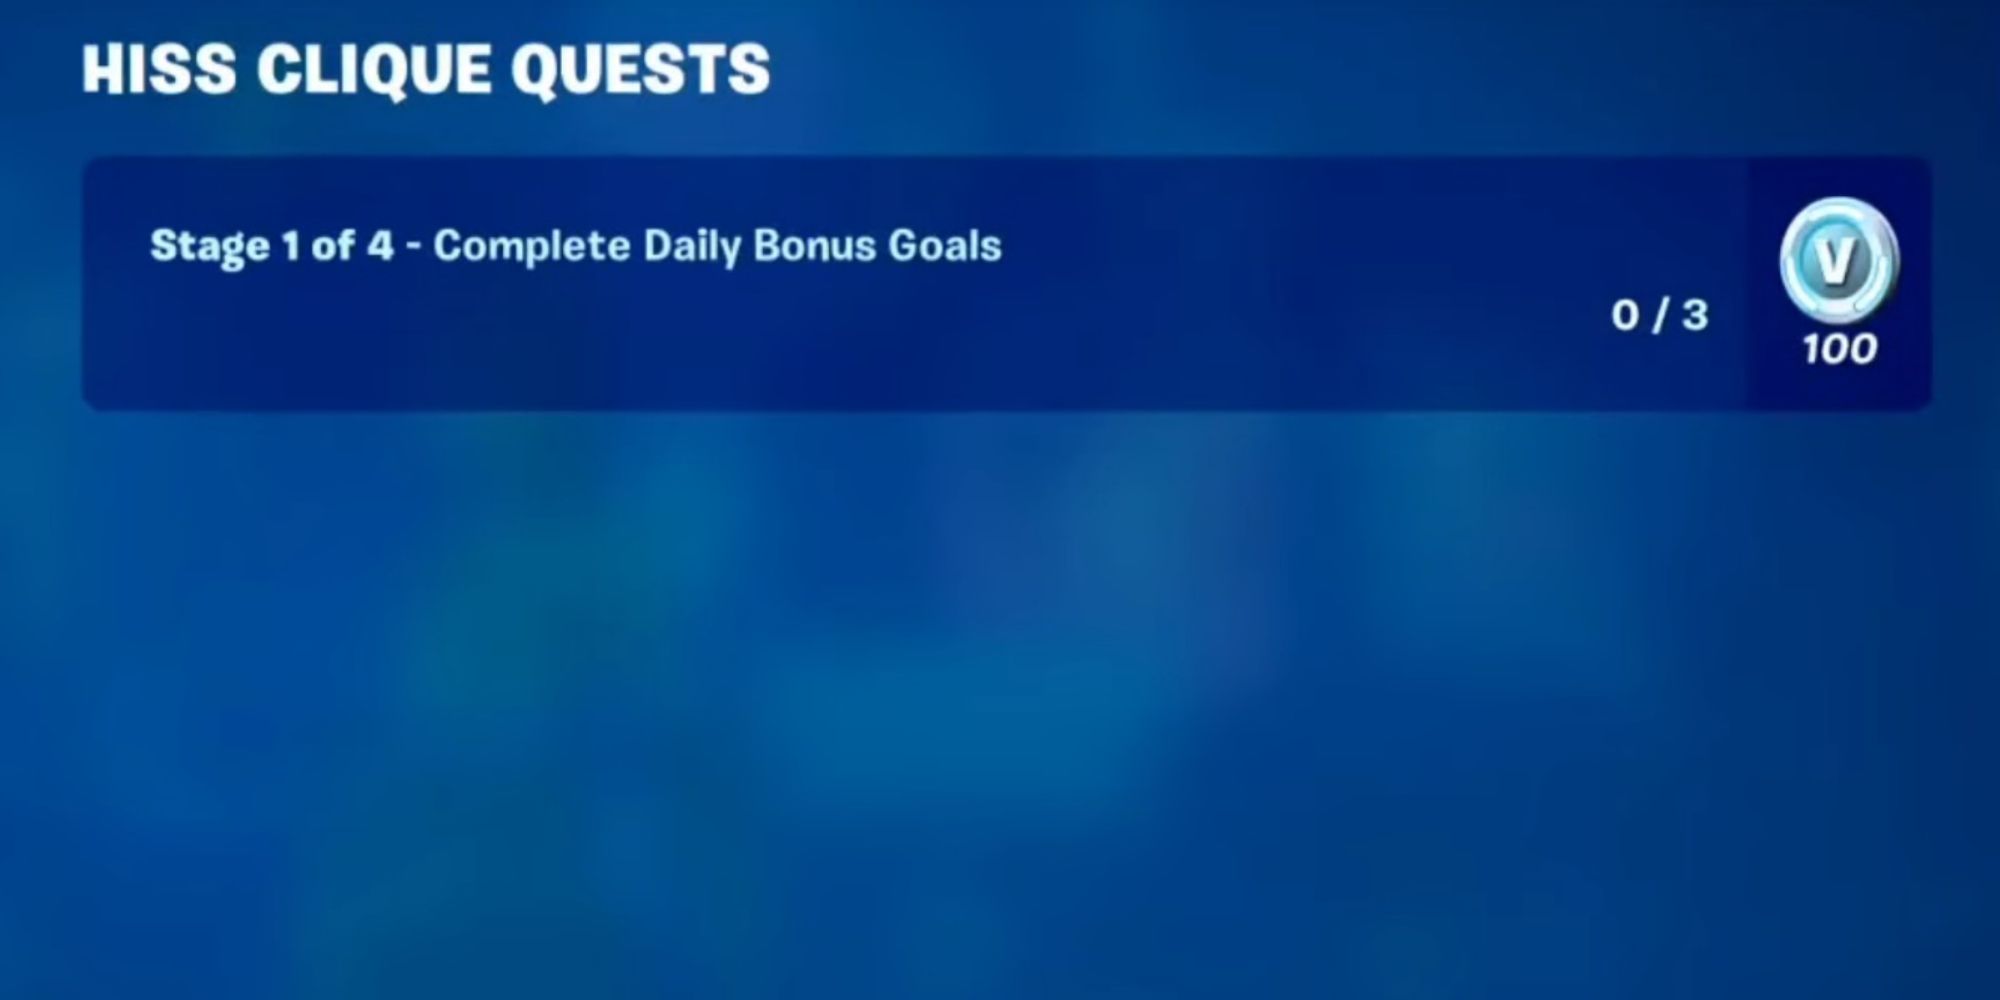 what are the hiss clique quests